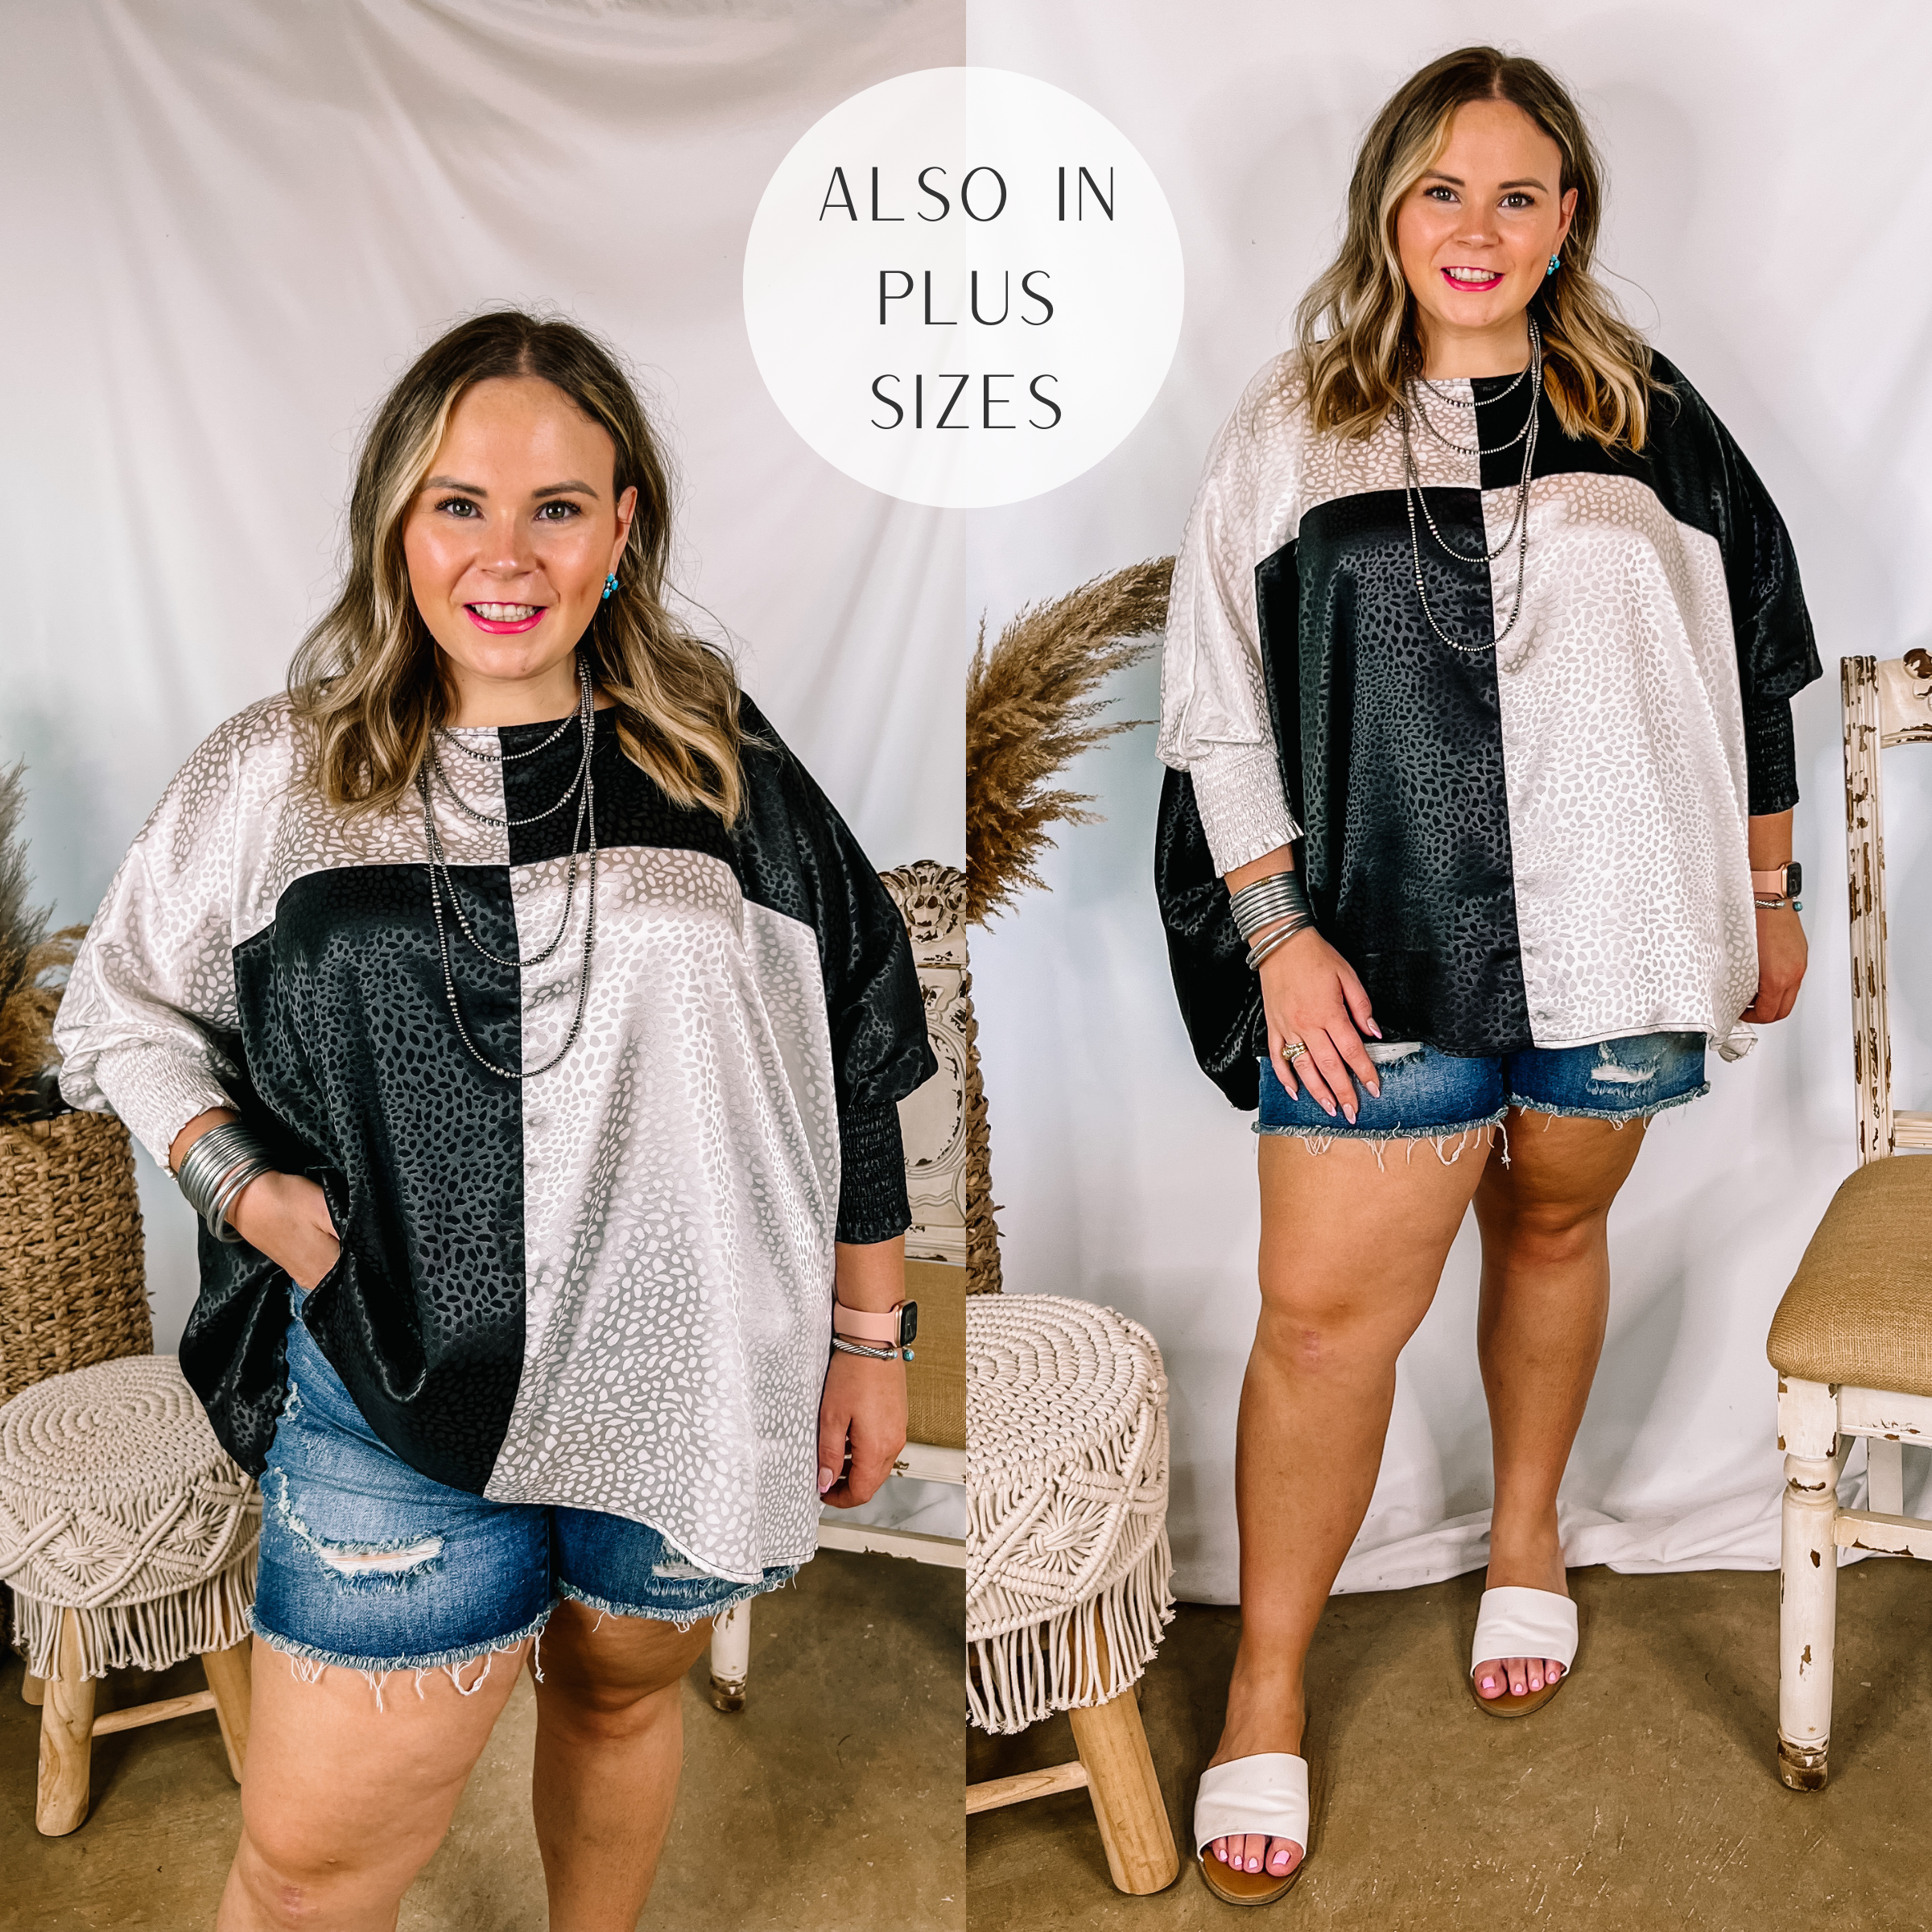 Model is wearing a black and white color block top that is a satin dotted print. Model has it paired with distressed denim shorts, white sandals, and silver jewelry.